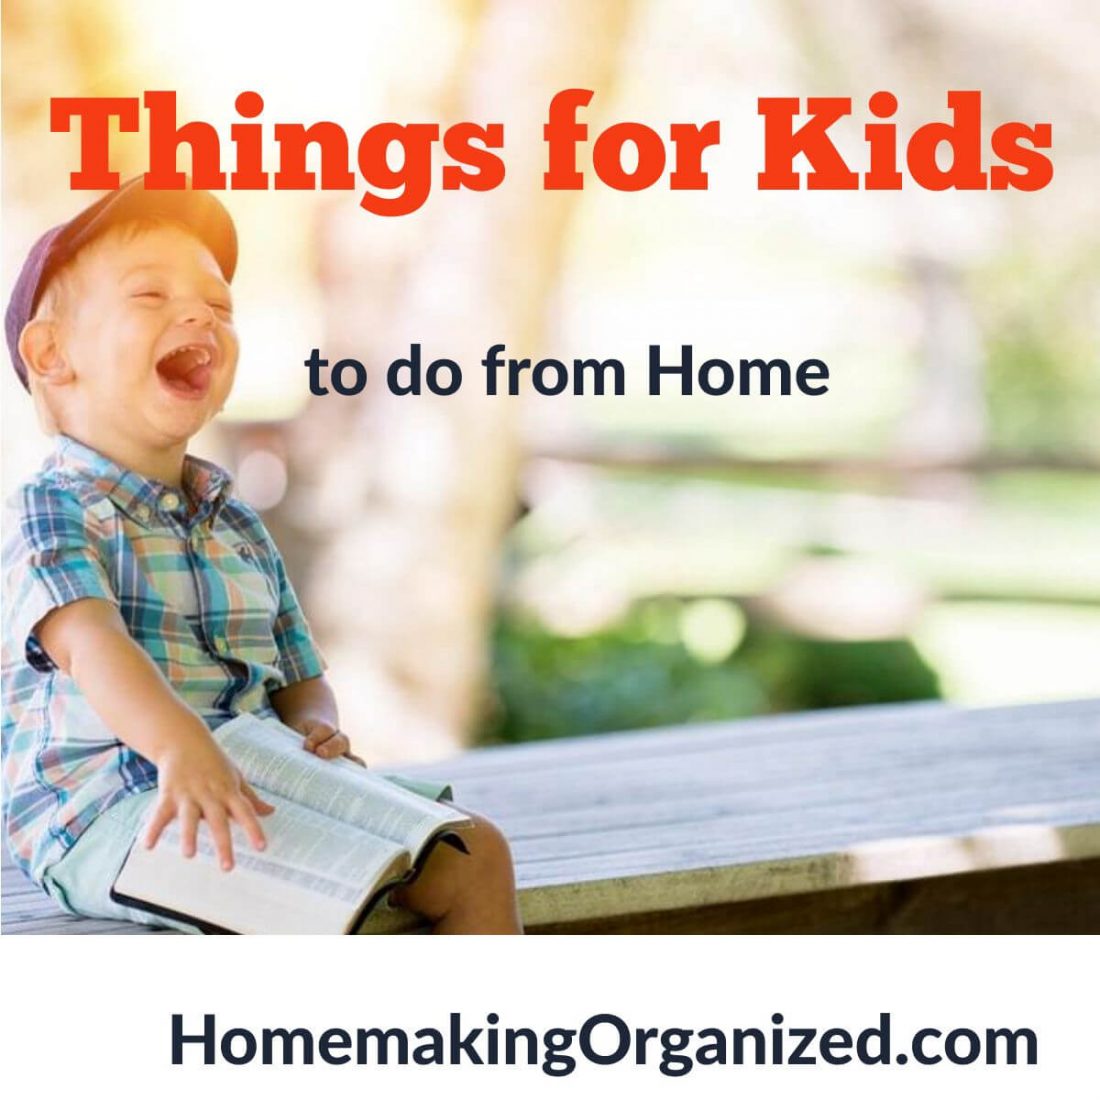 Things for kinds to do from home